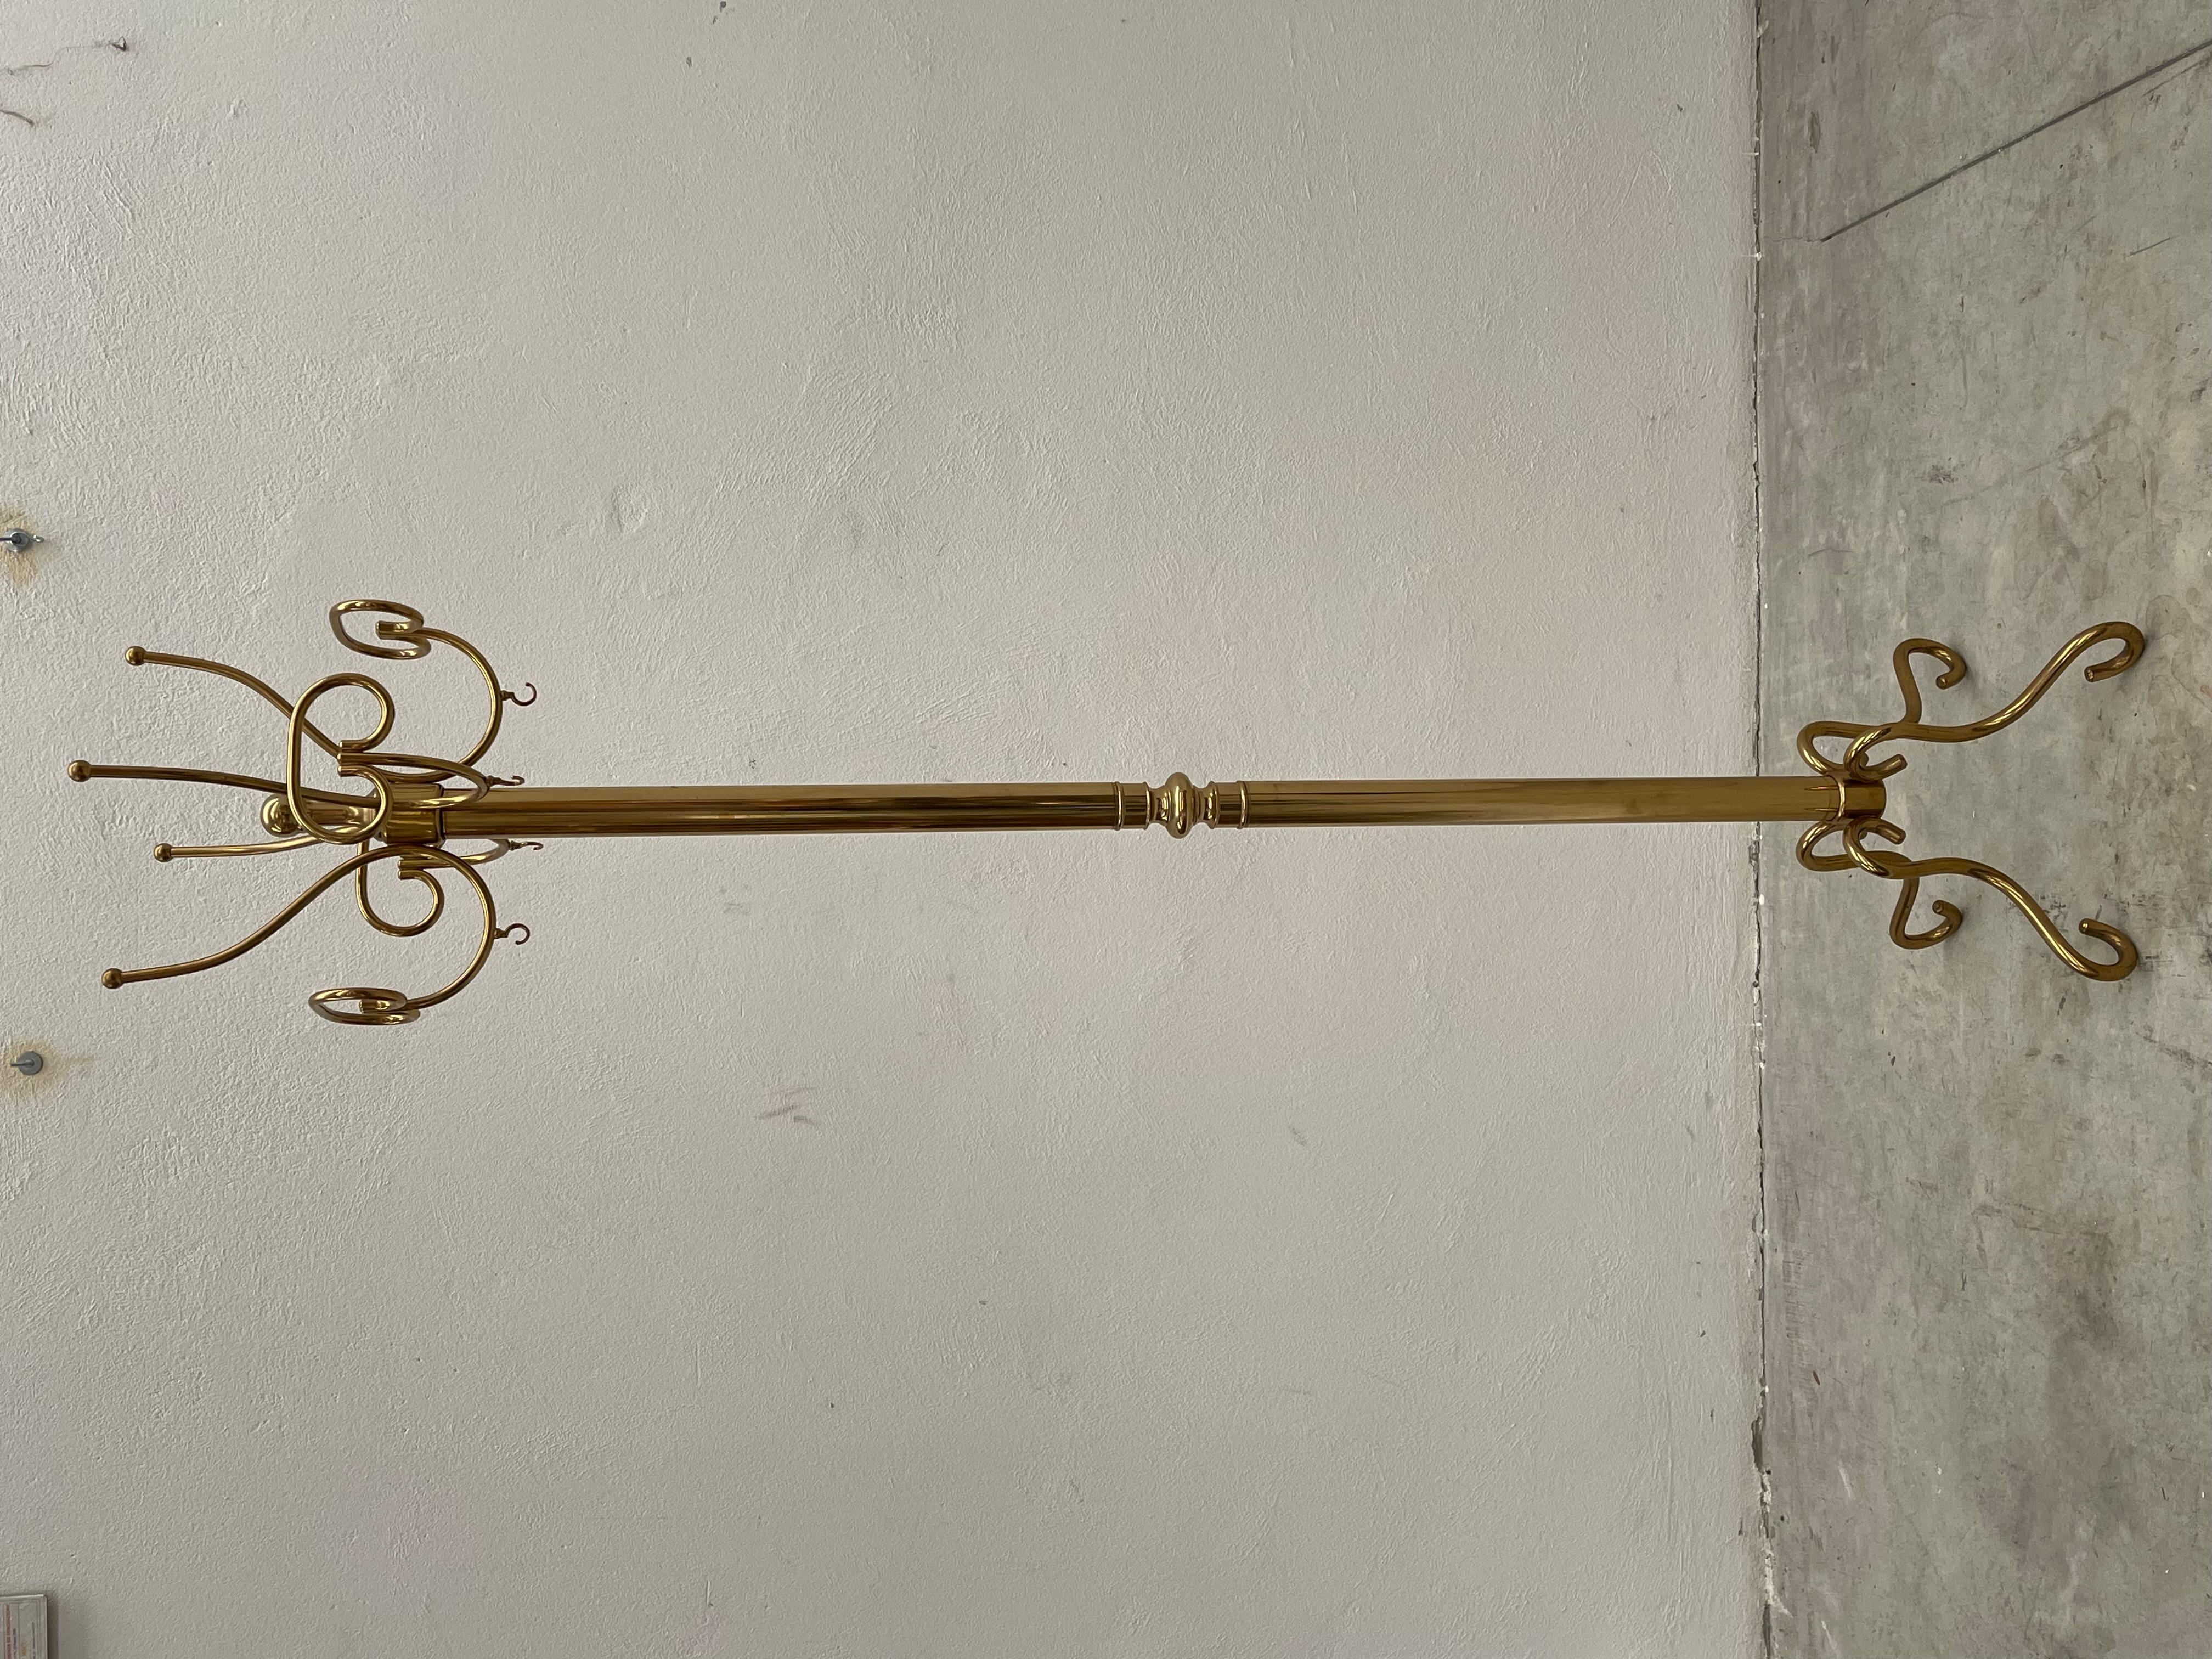 Gilt bronze coat hanger vintage italy 1950s In Excellent Condition For Sale In Cantù, IT